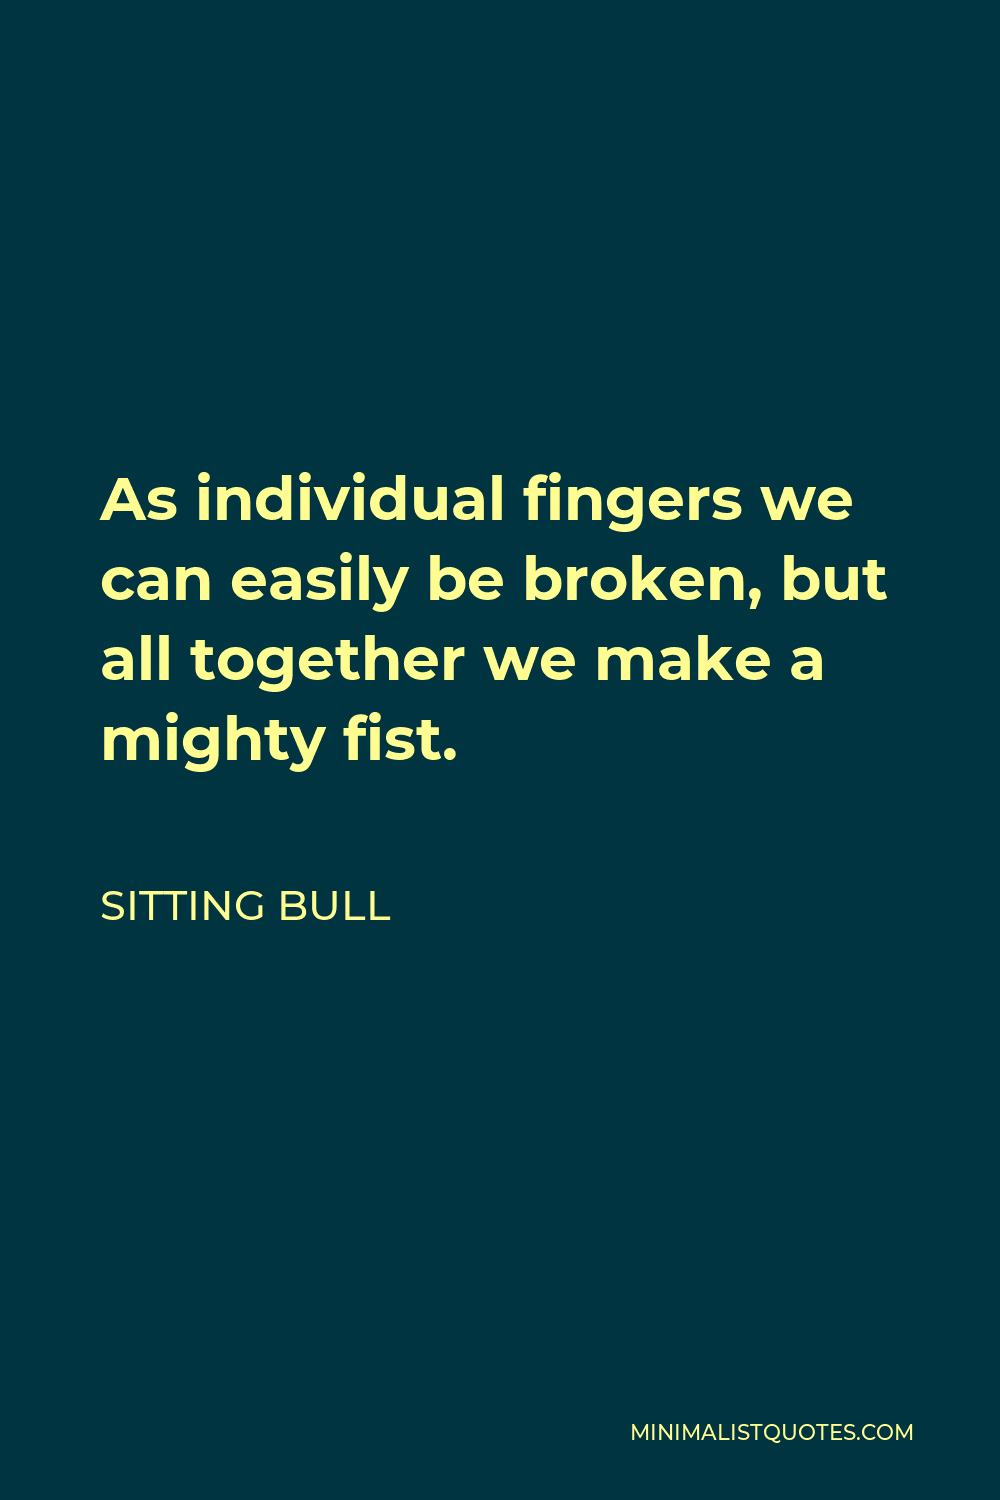 Sitting Bull Quote - As individual fingers we can easily be broken, but all together we make a mighty fist.